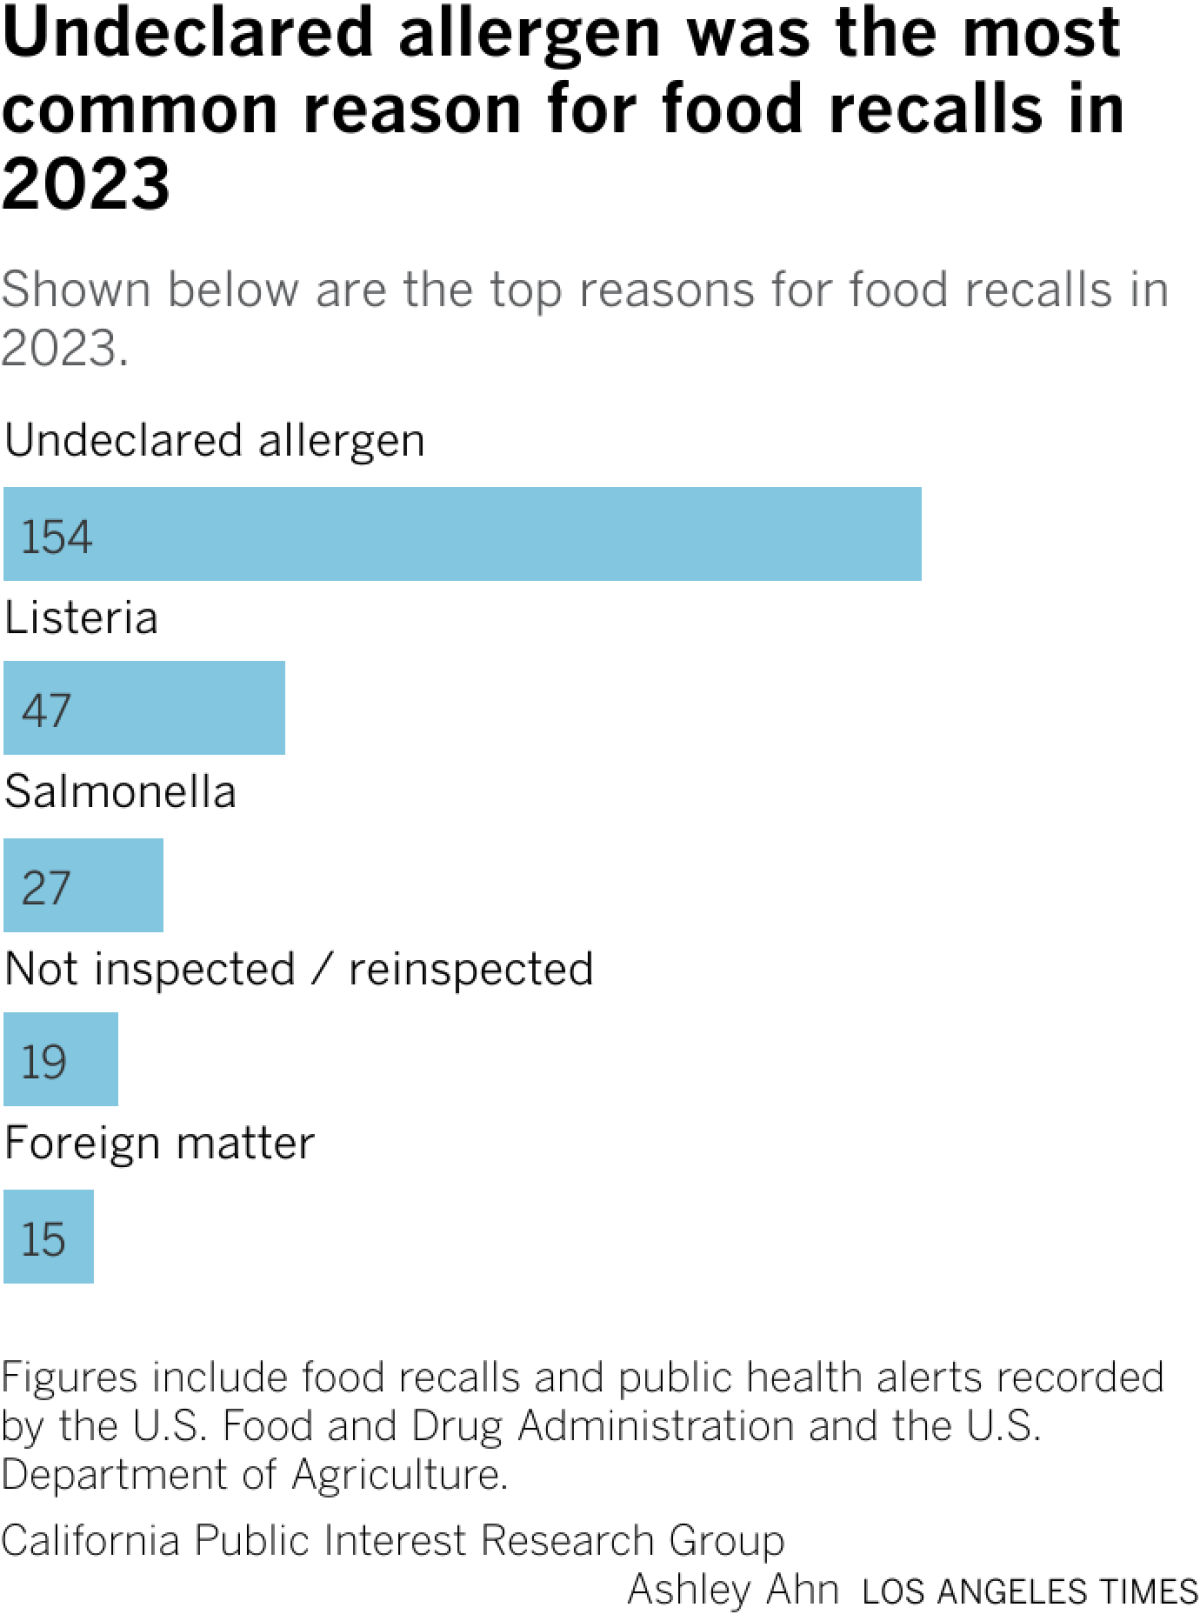 The most common reason for food recalls in 2023 was an undeclared allergen, which accounted for almost half of all food recalls.  Listeria and Salmonella followed.  